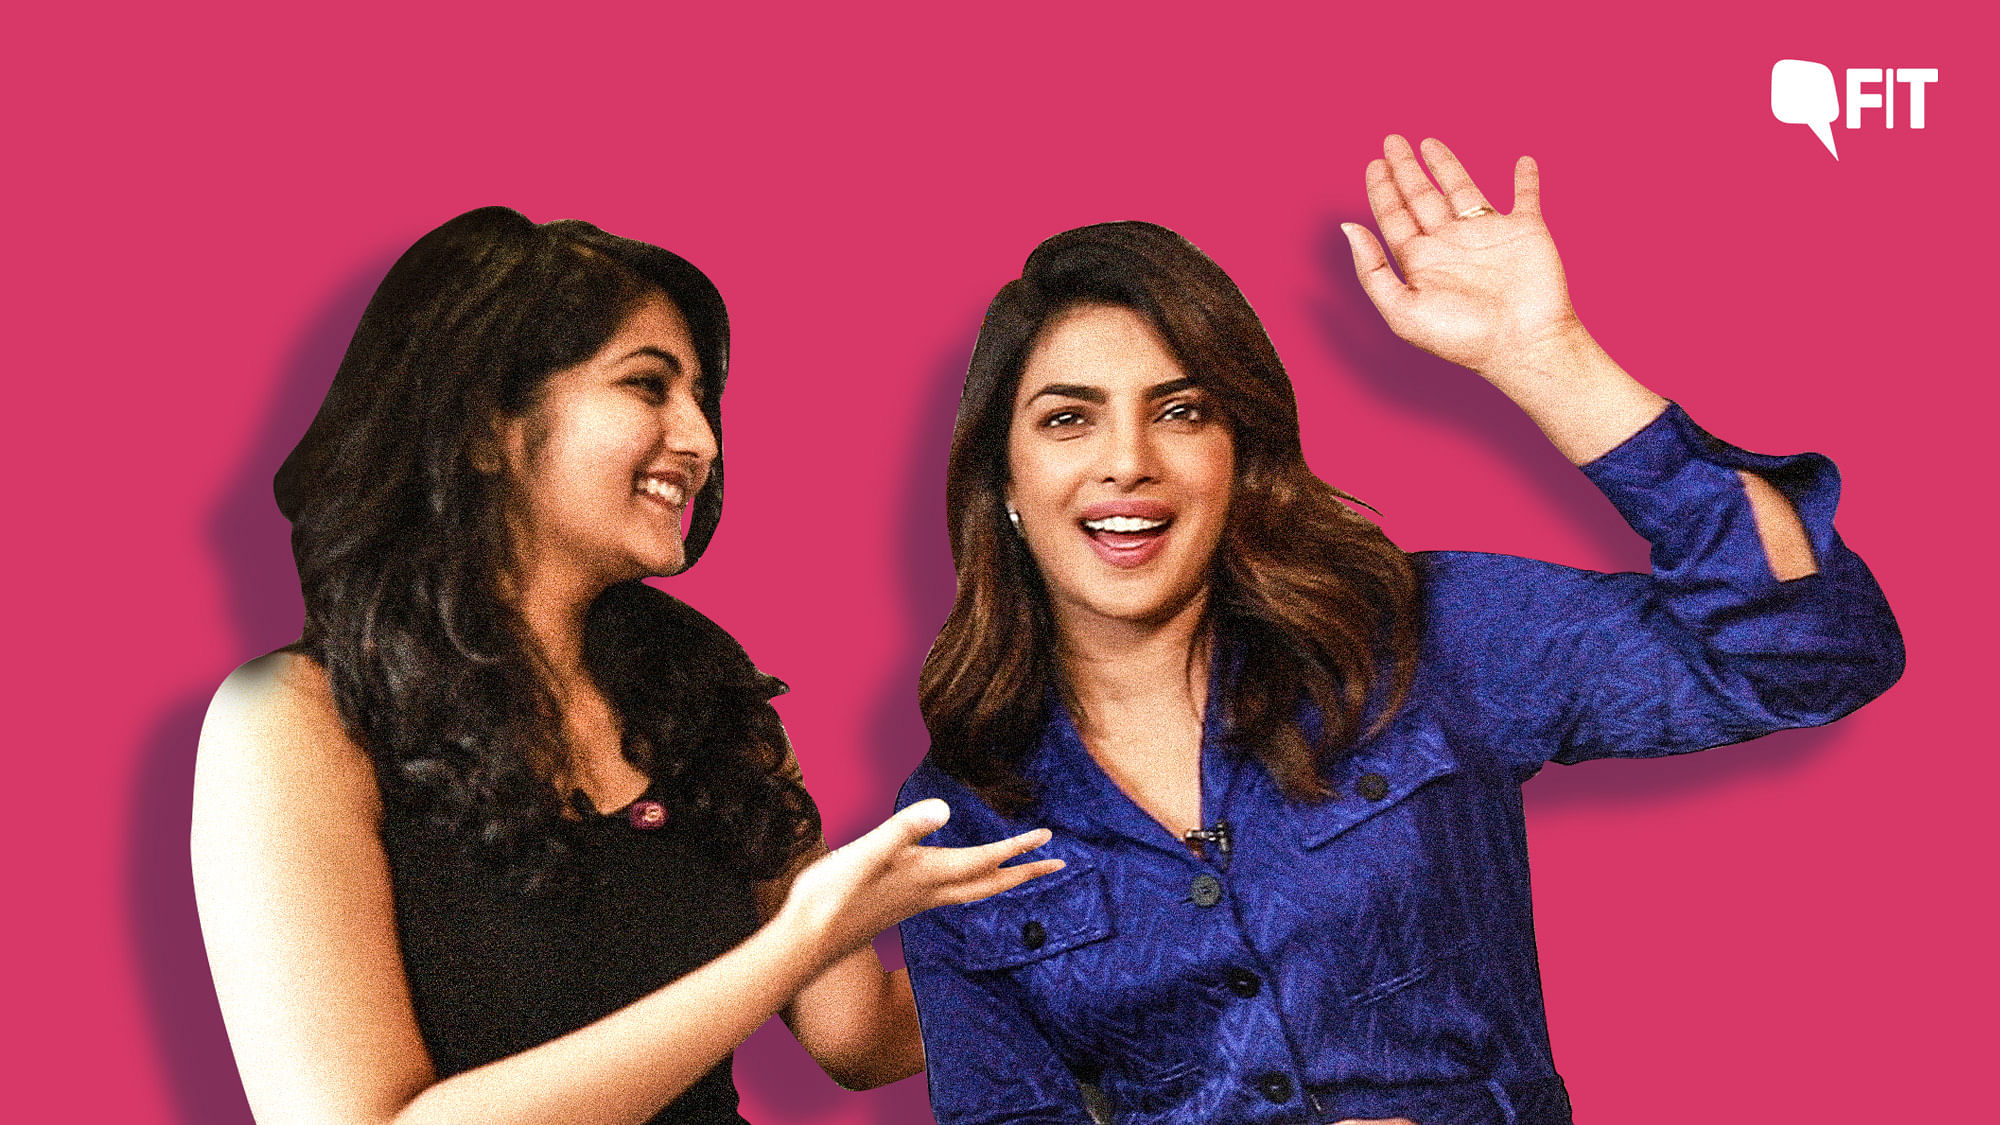 FIT caught up with Priyanka Chopra, actor and also a UNICEF ambassador.